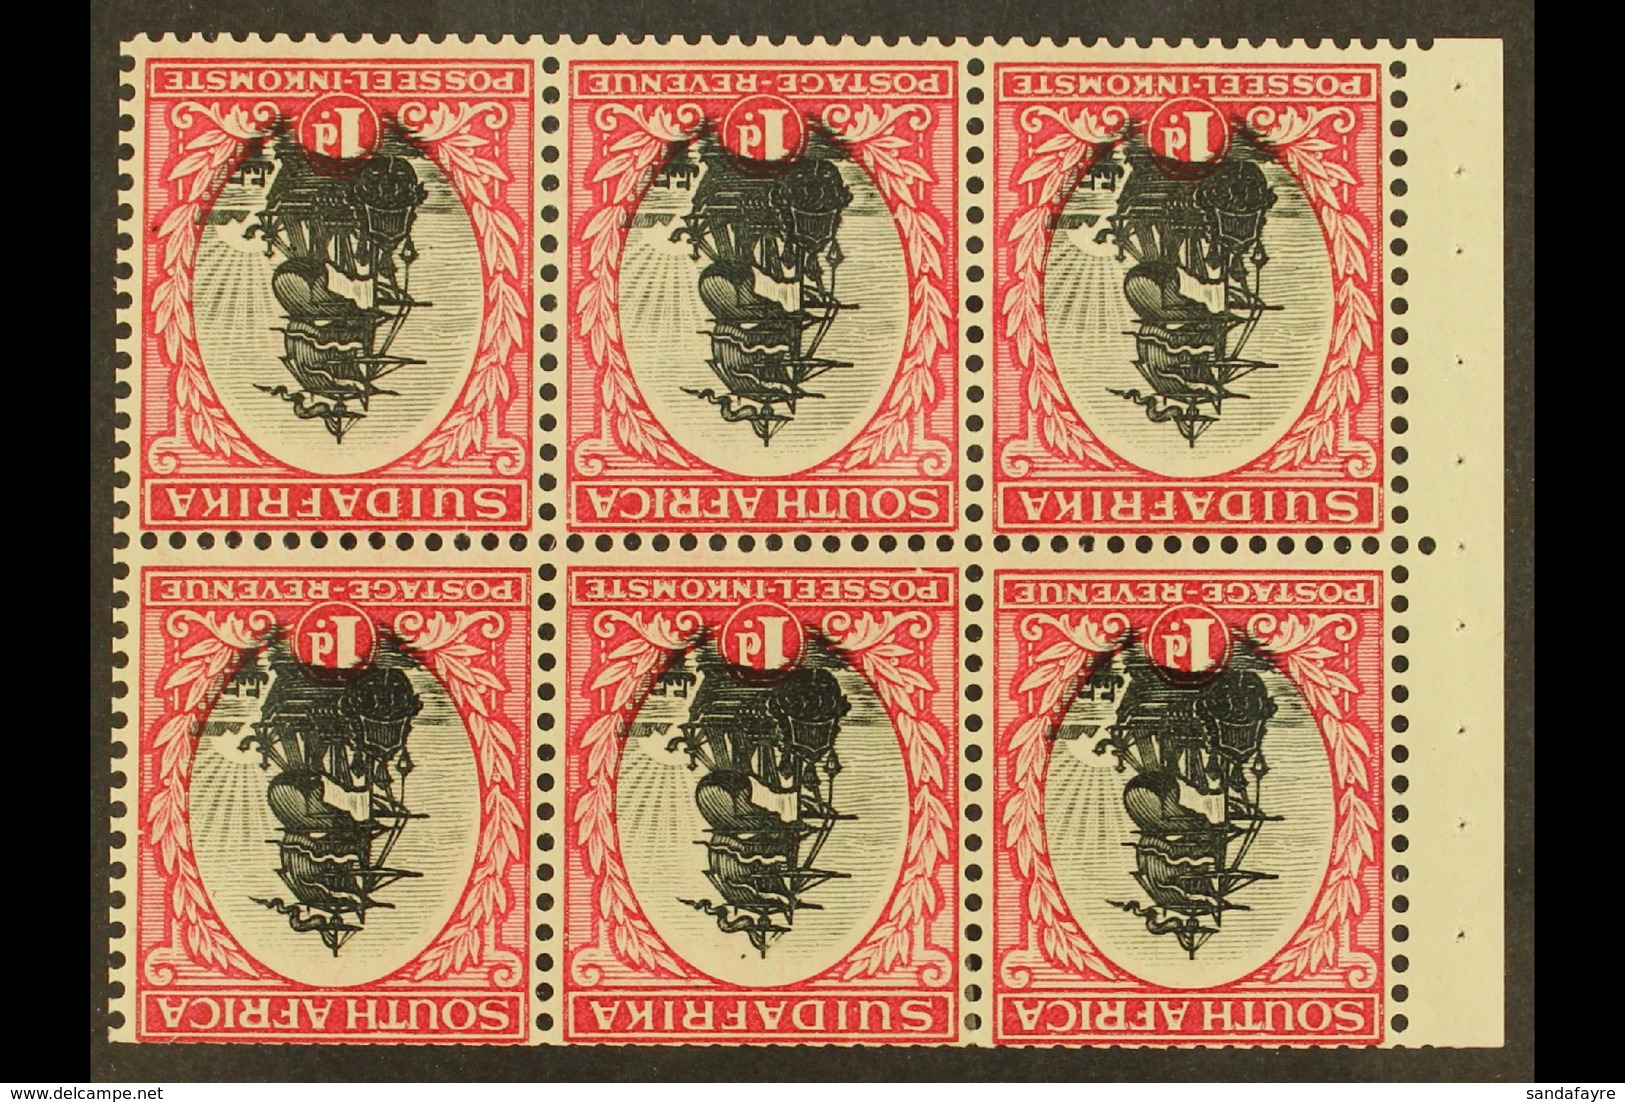 1930/1 1d Black & Carmine, Type I, Watermark Inverted, Booklet Pane Of 6 With Binding Margin, English Stamp First, SG 43 - Ohne Zuordnung